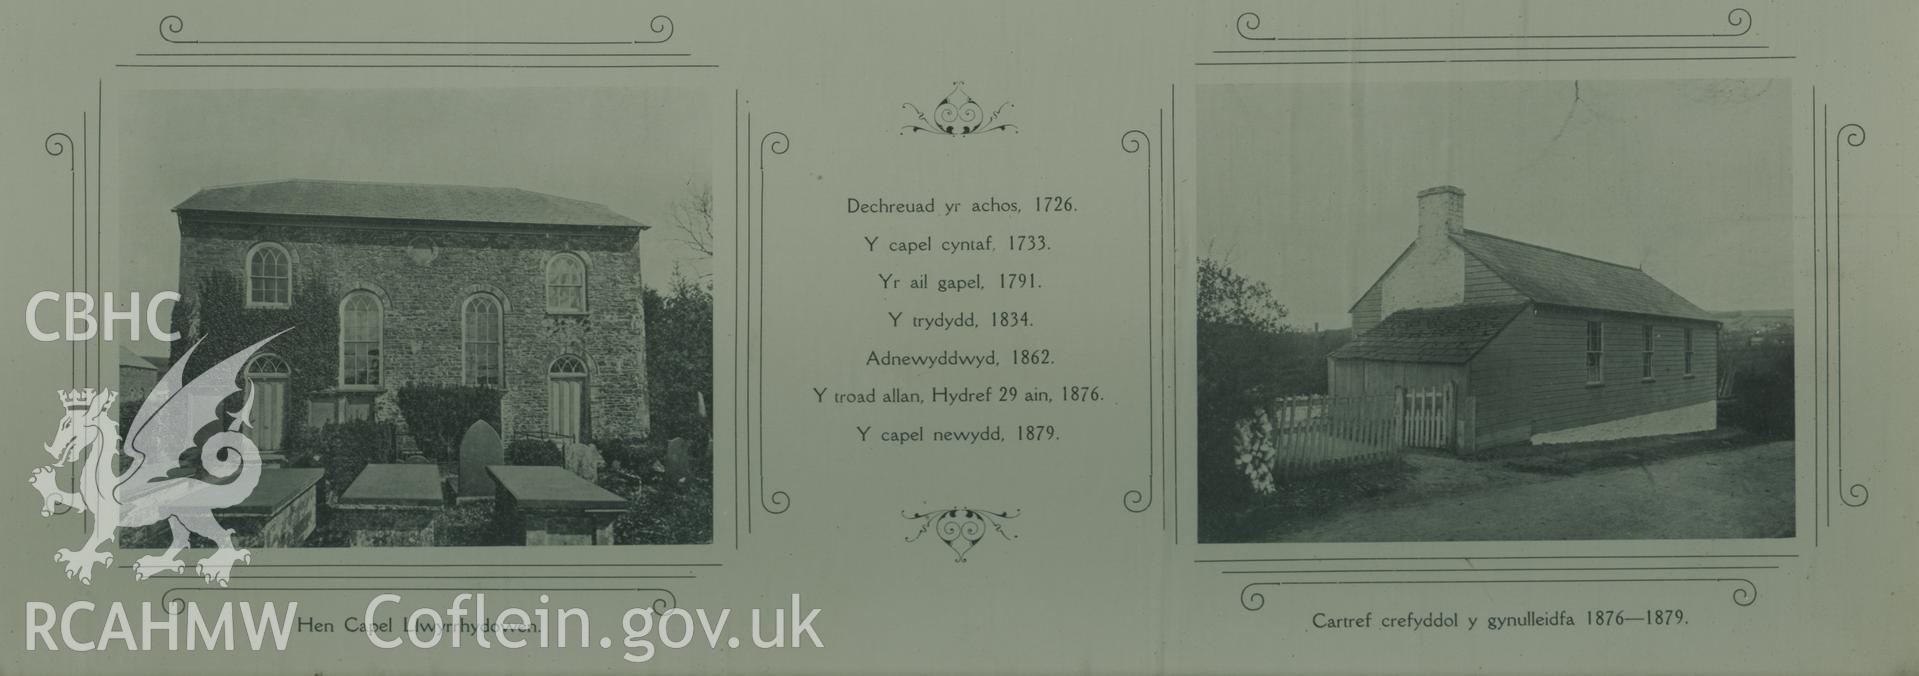 Two black and white photographs showing (from left to right) Hen Capel Llwyrrhydowen and 'the congregation's spiritual home 1876-1879. Important dates in the congregation's history between the photographs. Donated to RCAHMW during the Digital Dissent Project.